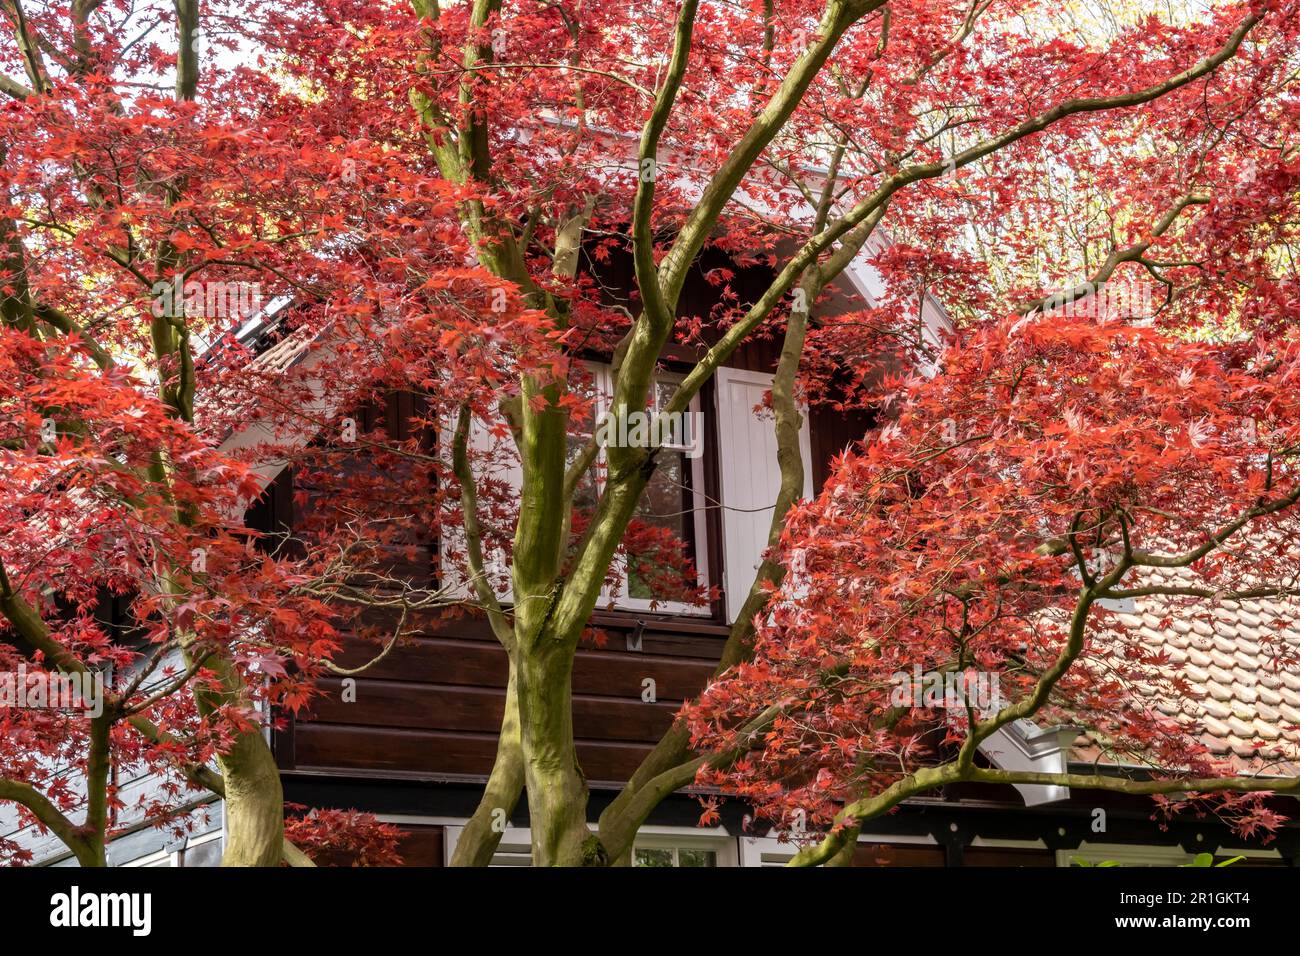 Japanese maple, Acer palmatum 'Atropurpureum' red, tree with red leaves in front garden of house in spring, Netherlands Stock Photo